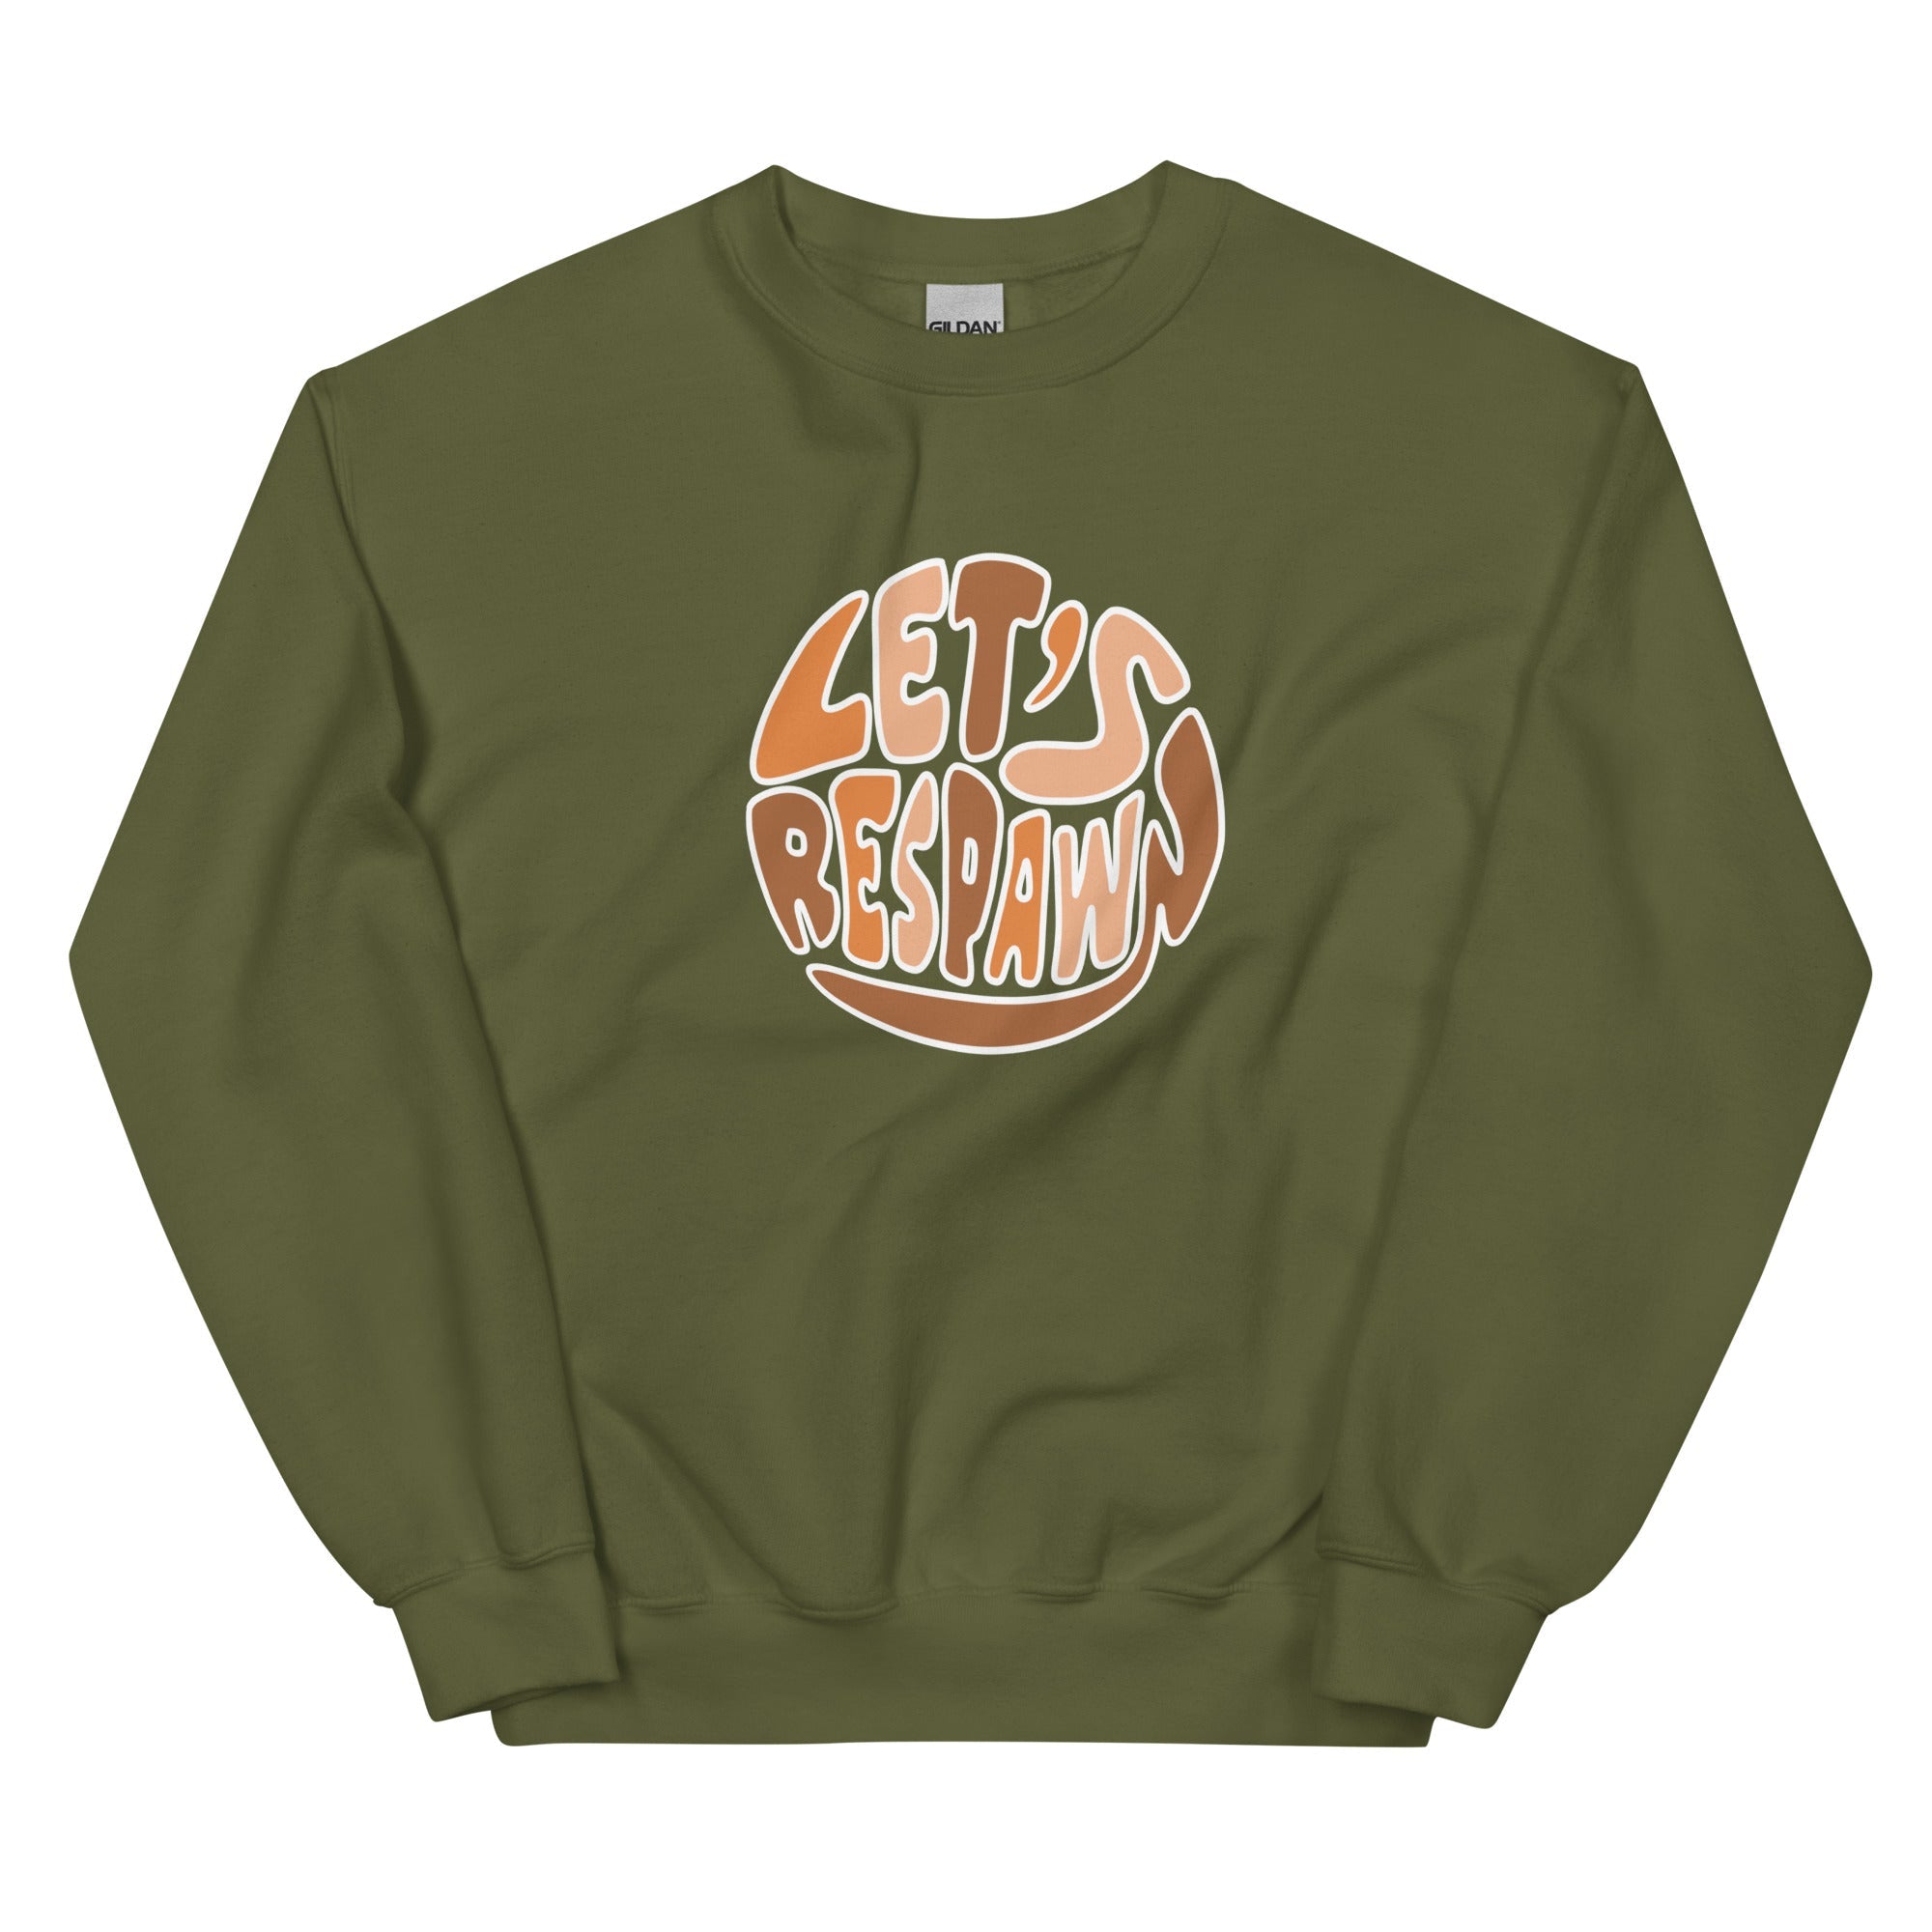 Let's Respawn | Unisex Sweatshirt Threads and Thistles Inventory Military Green S 